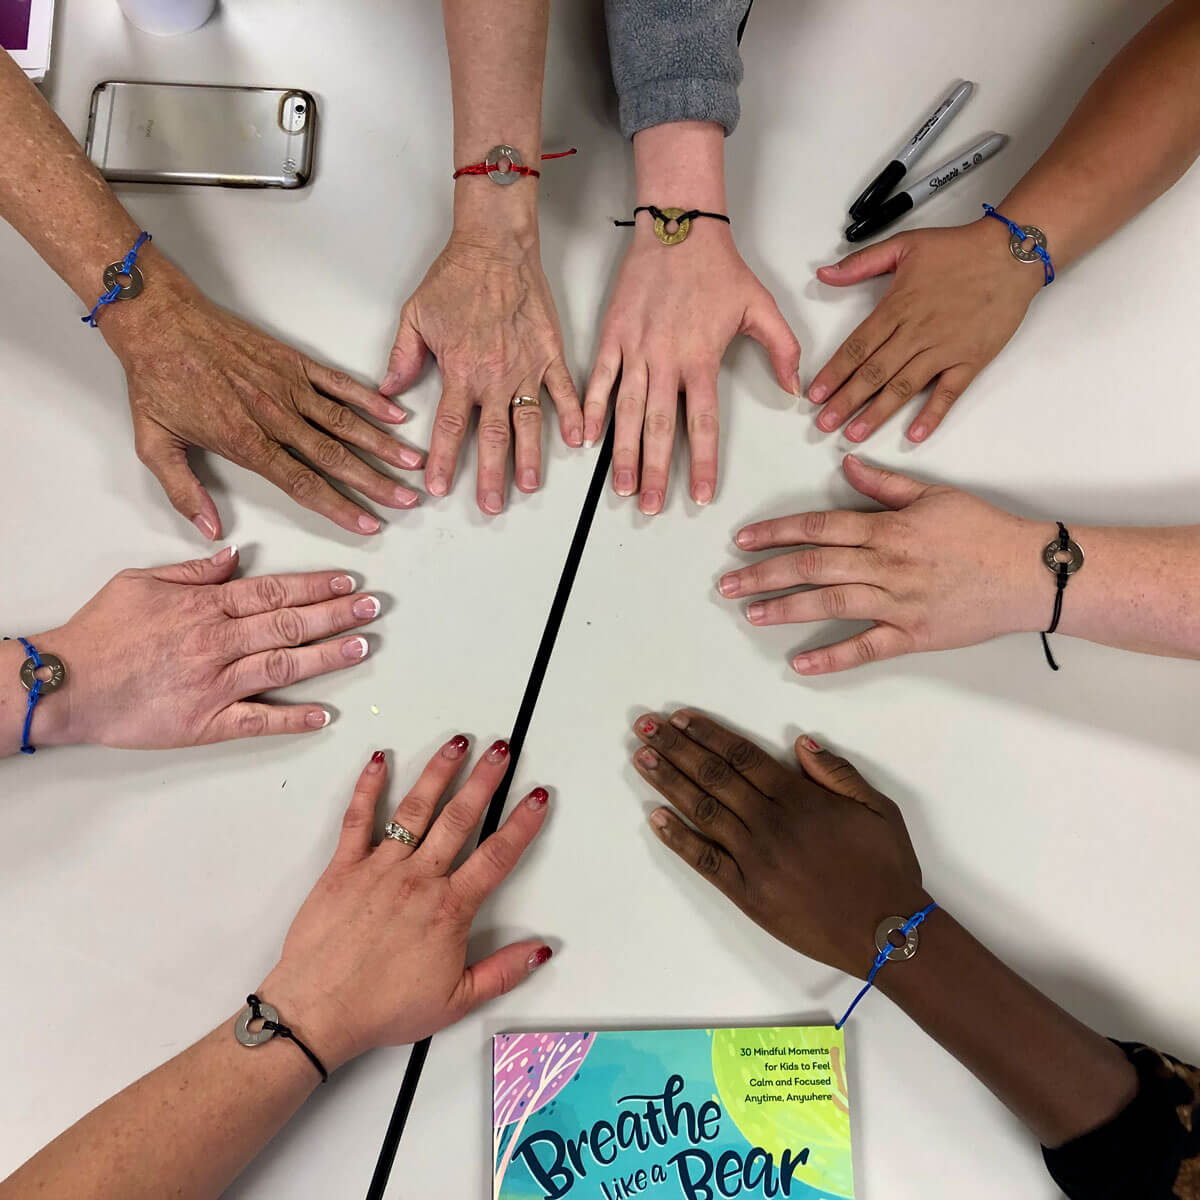 Group of adult hands placed together in a circle on a table.